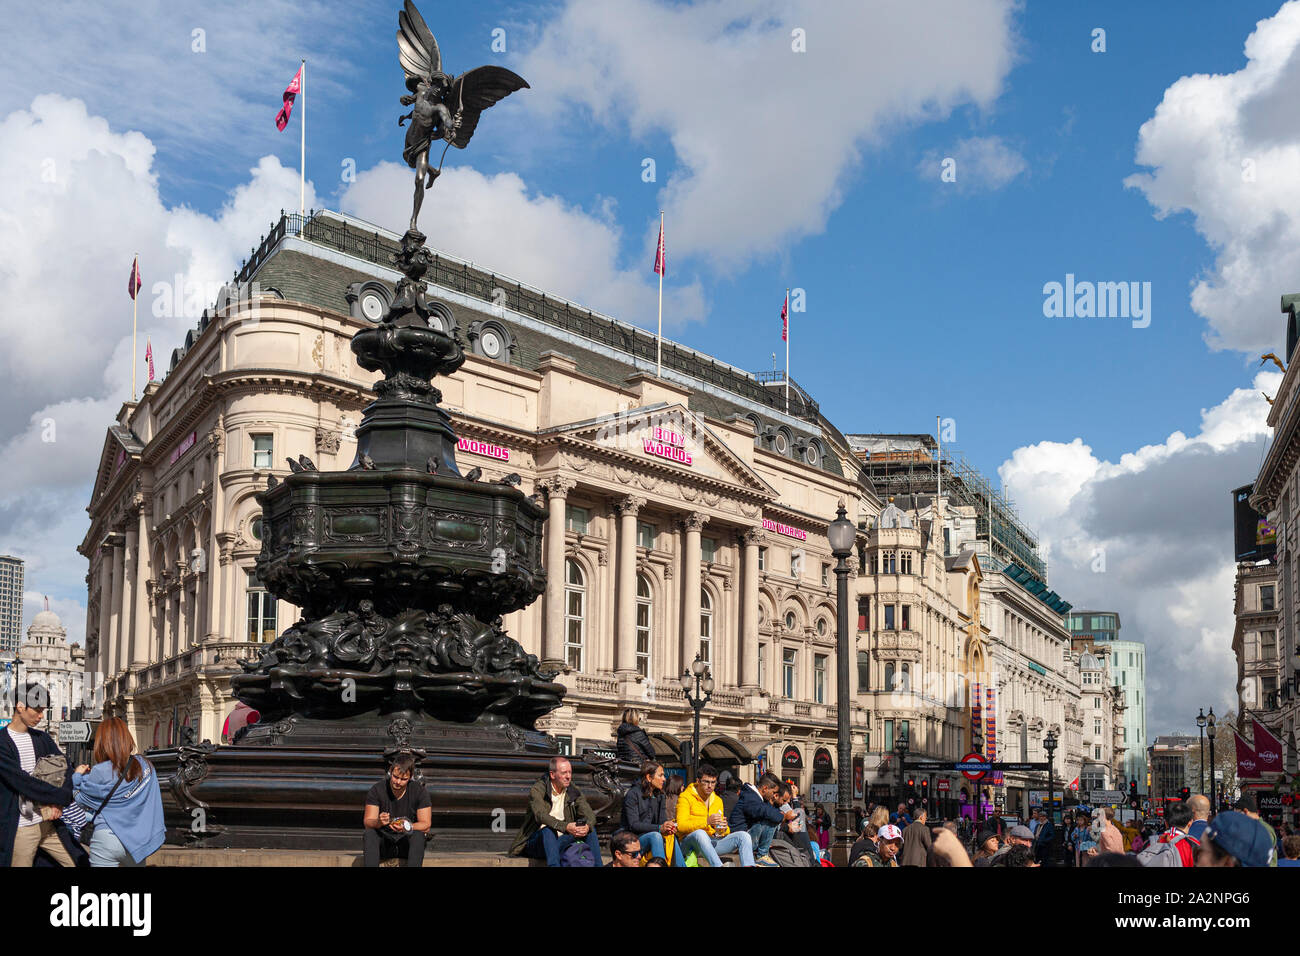 Statue of Anteros (Eros) in Piccadilly Circus, London, UK Stock Photo